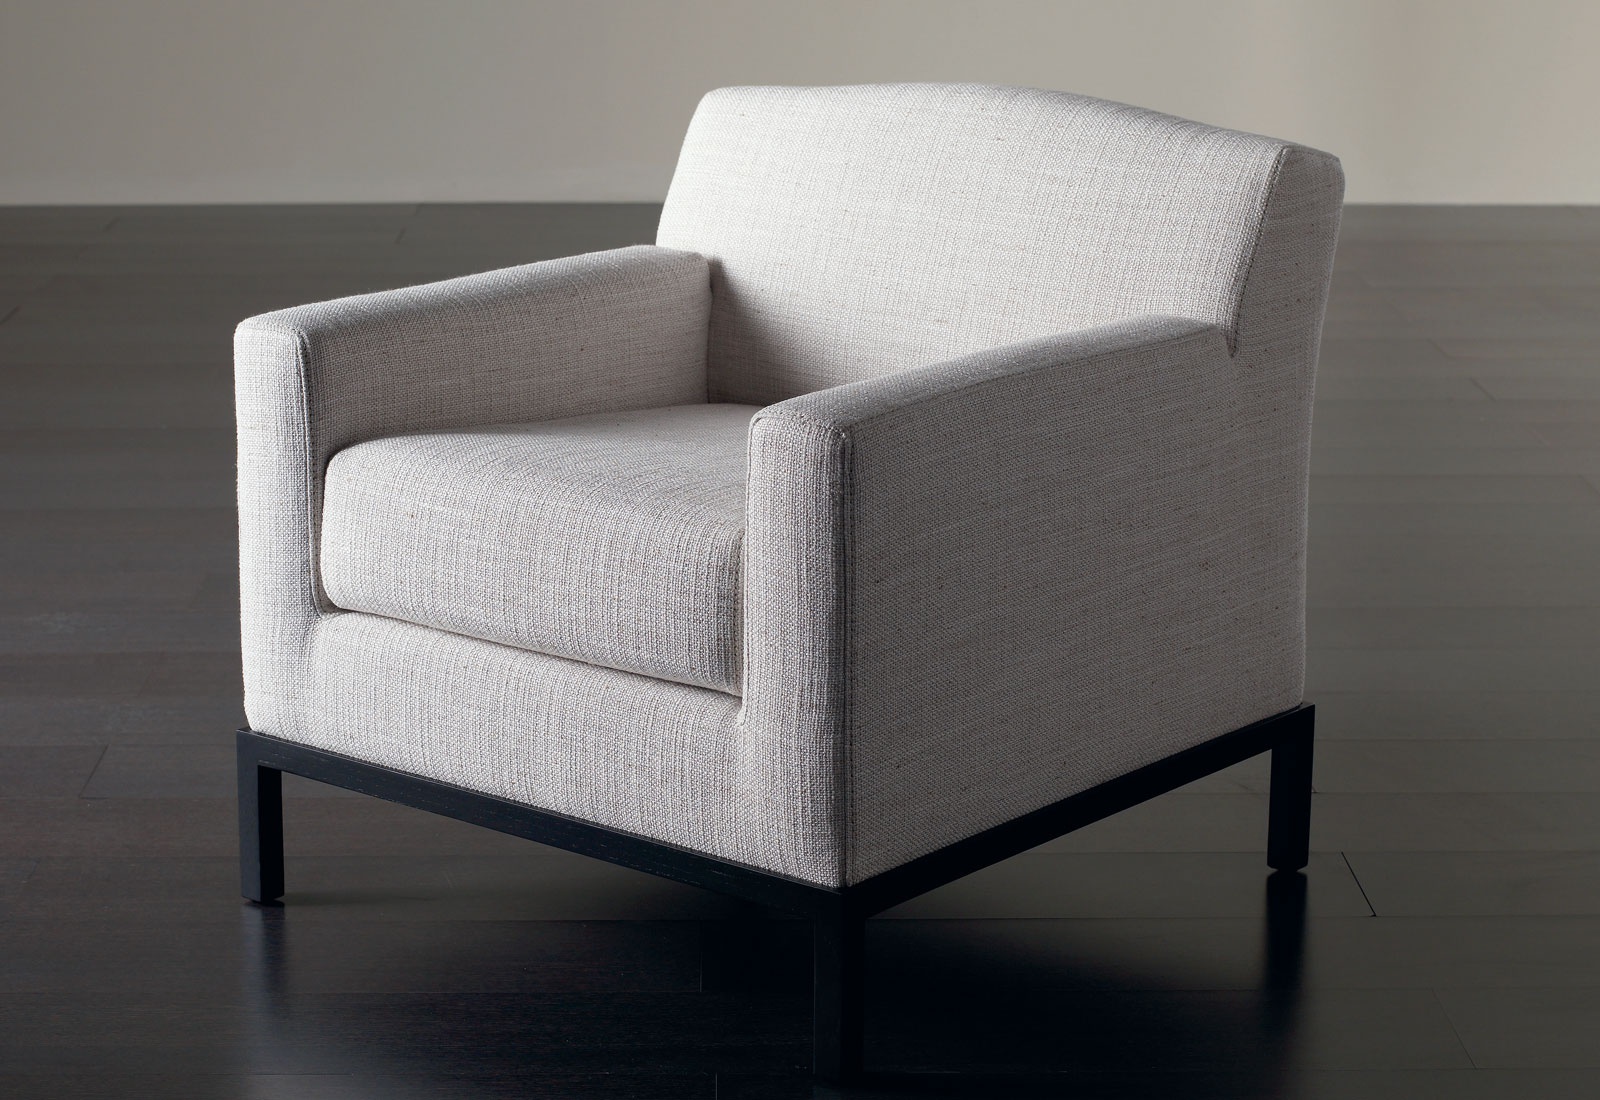 armchair a frame made of wood, Meridiani - Luxury furniture MR